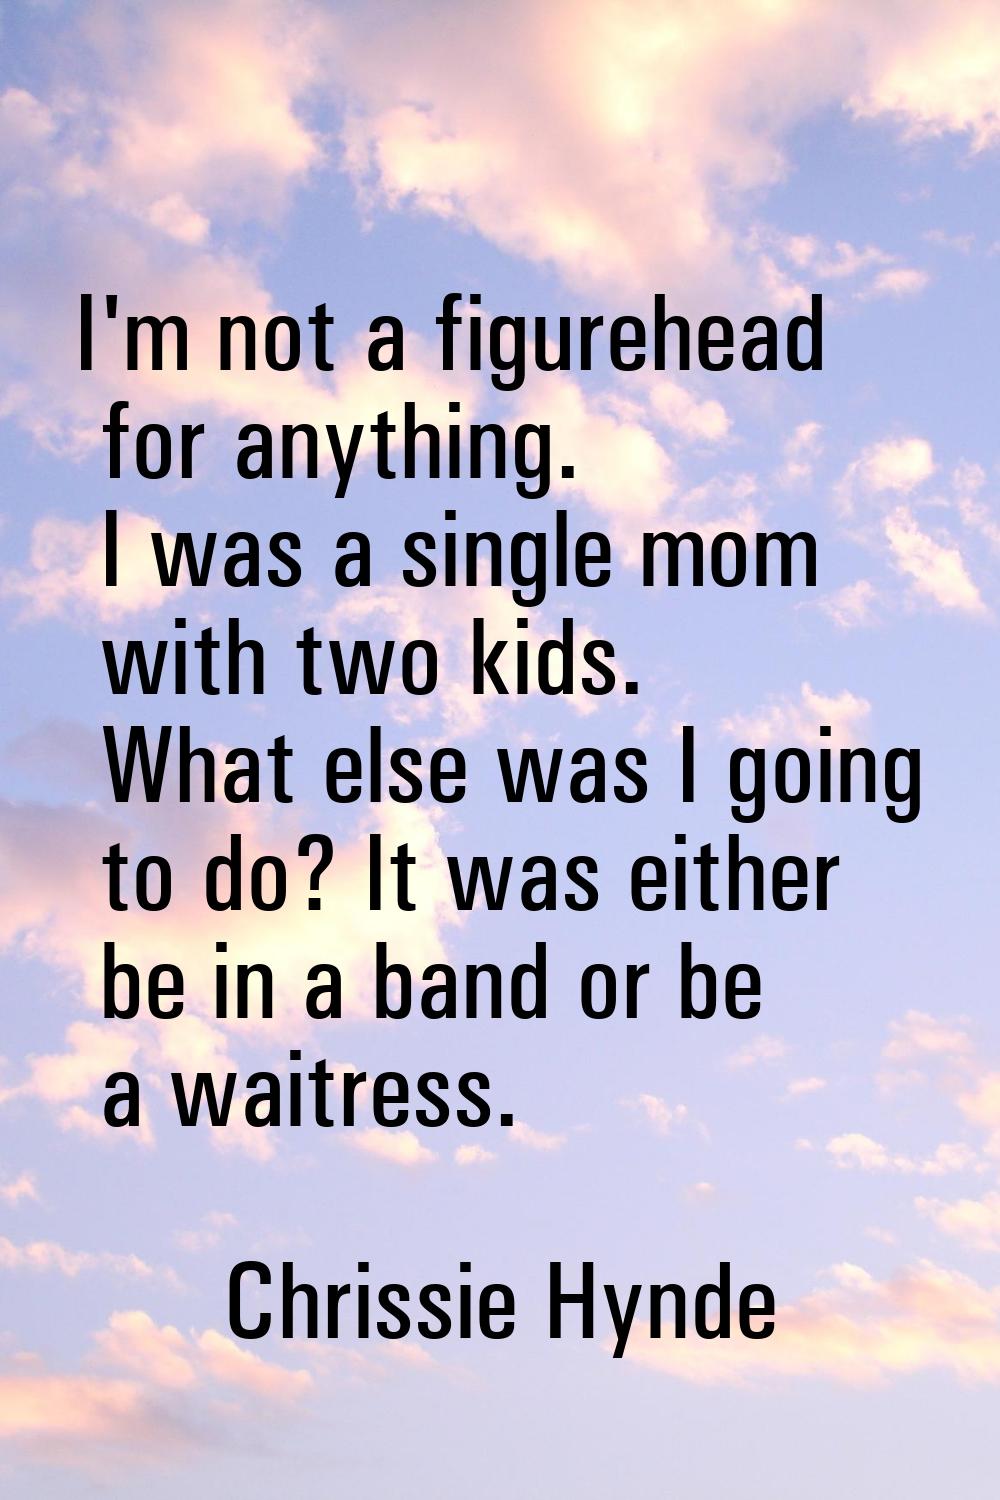 I'm not a figurehead for anything. I was a single mom with two kids. What else was I going to do? I